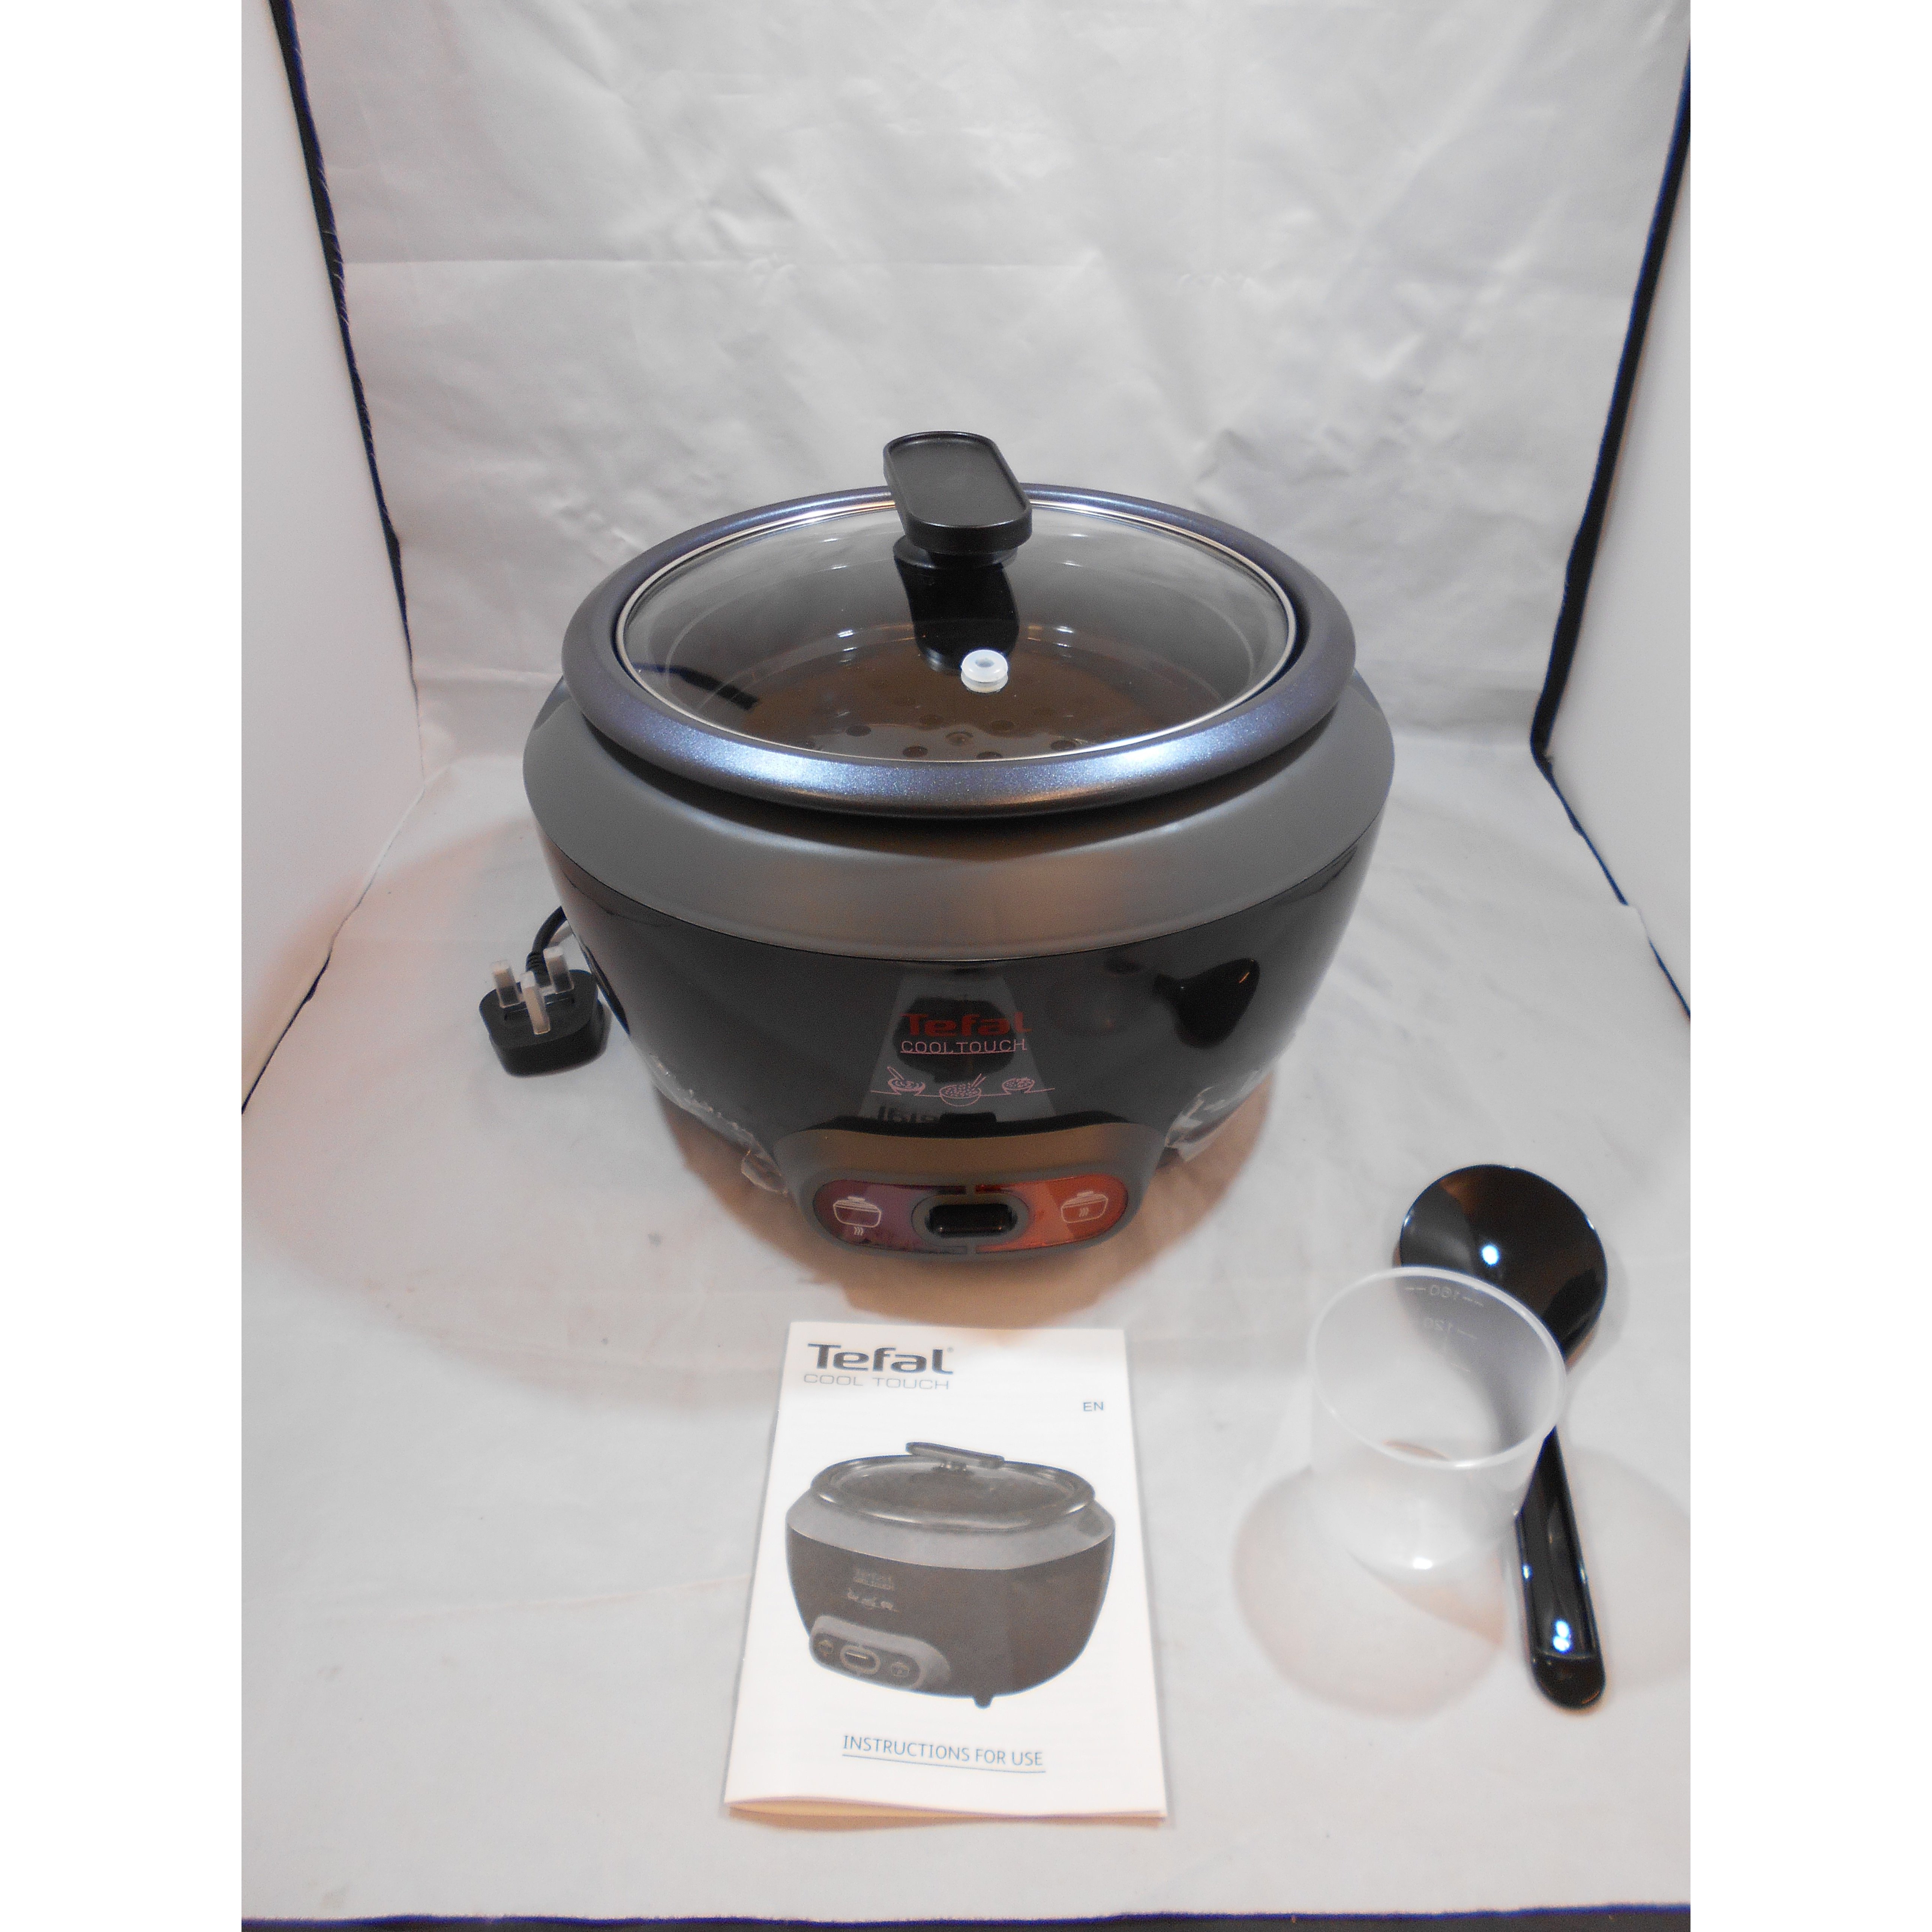 Tefal RK1568UK Cool Touch Rice Cooker, (20 Portions), 700 W, 1.8 Litre